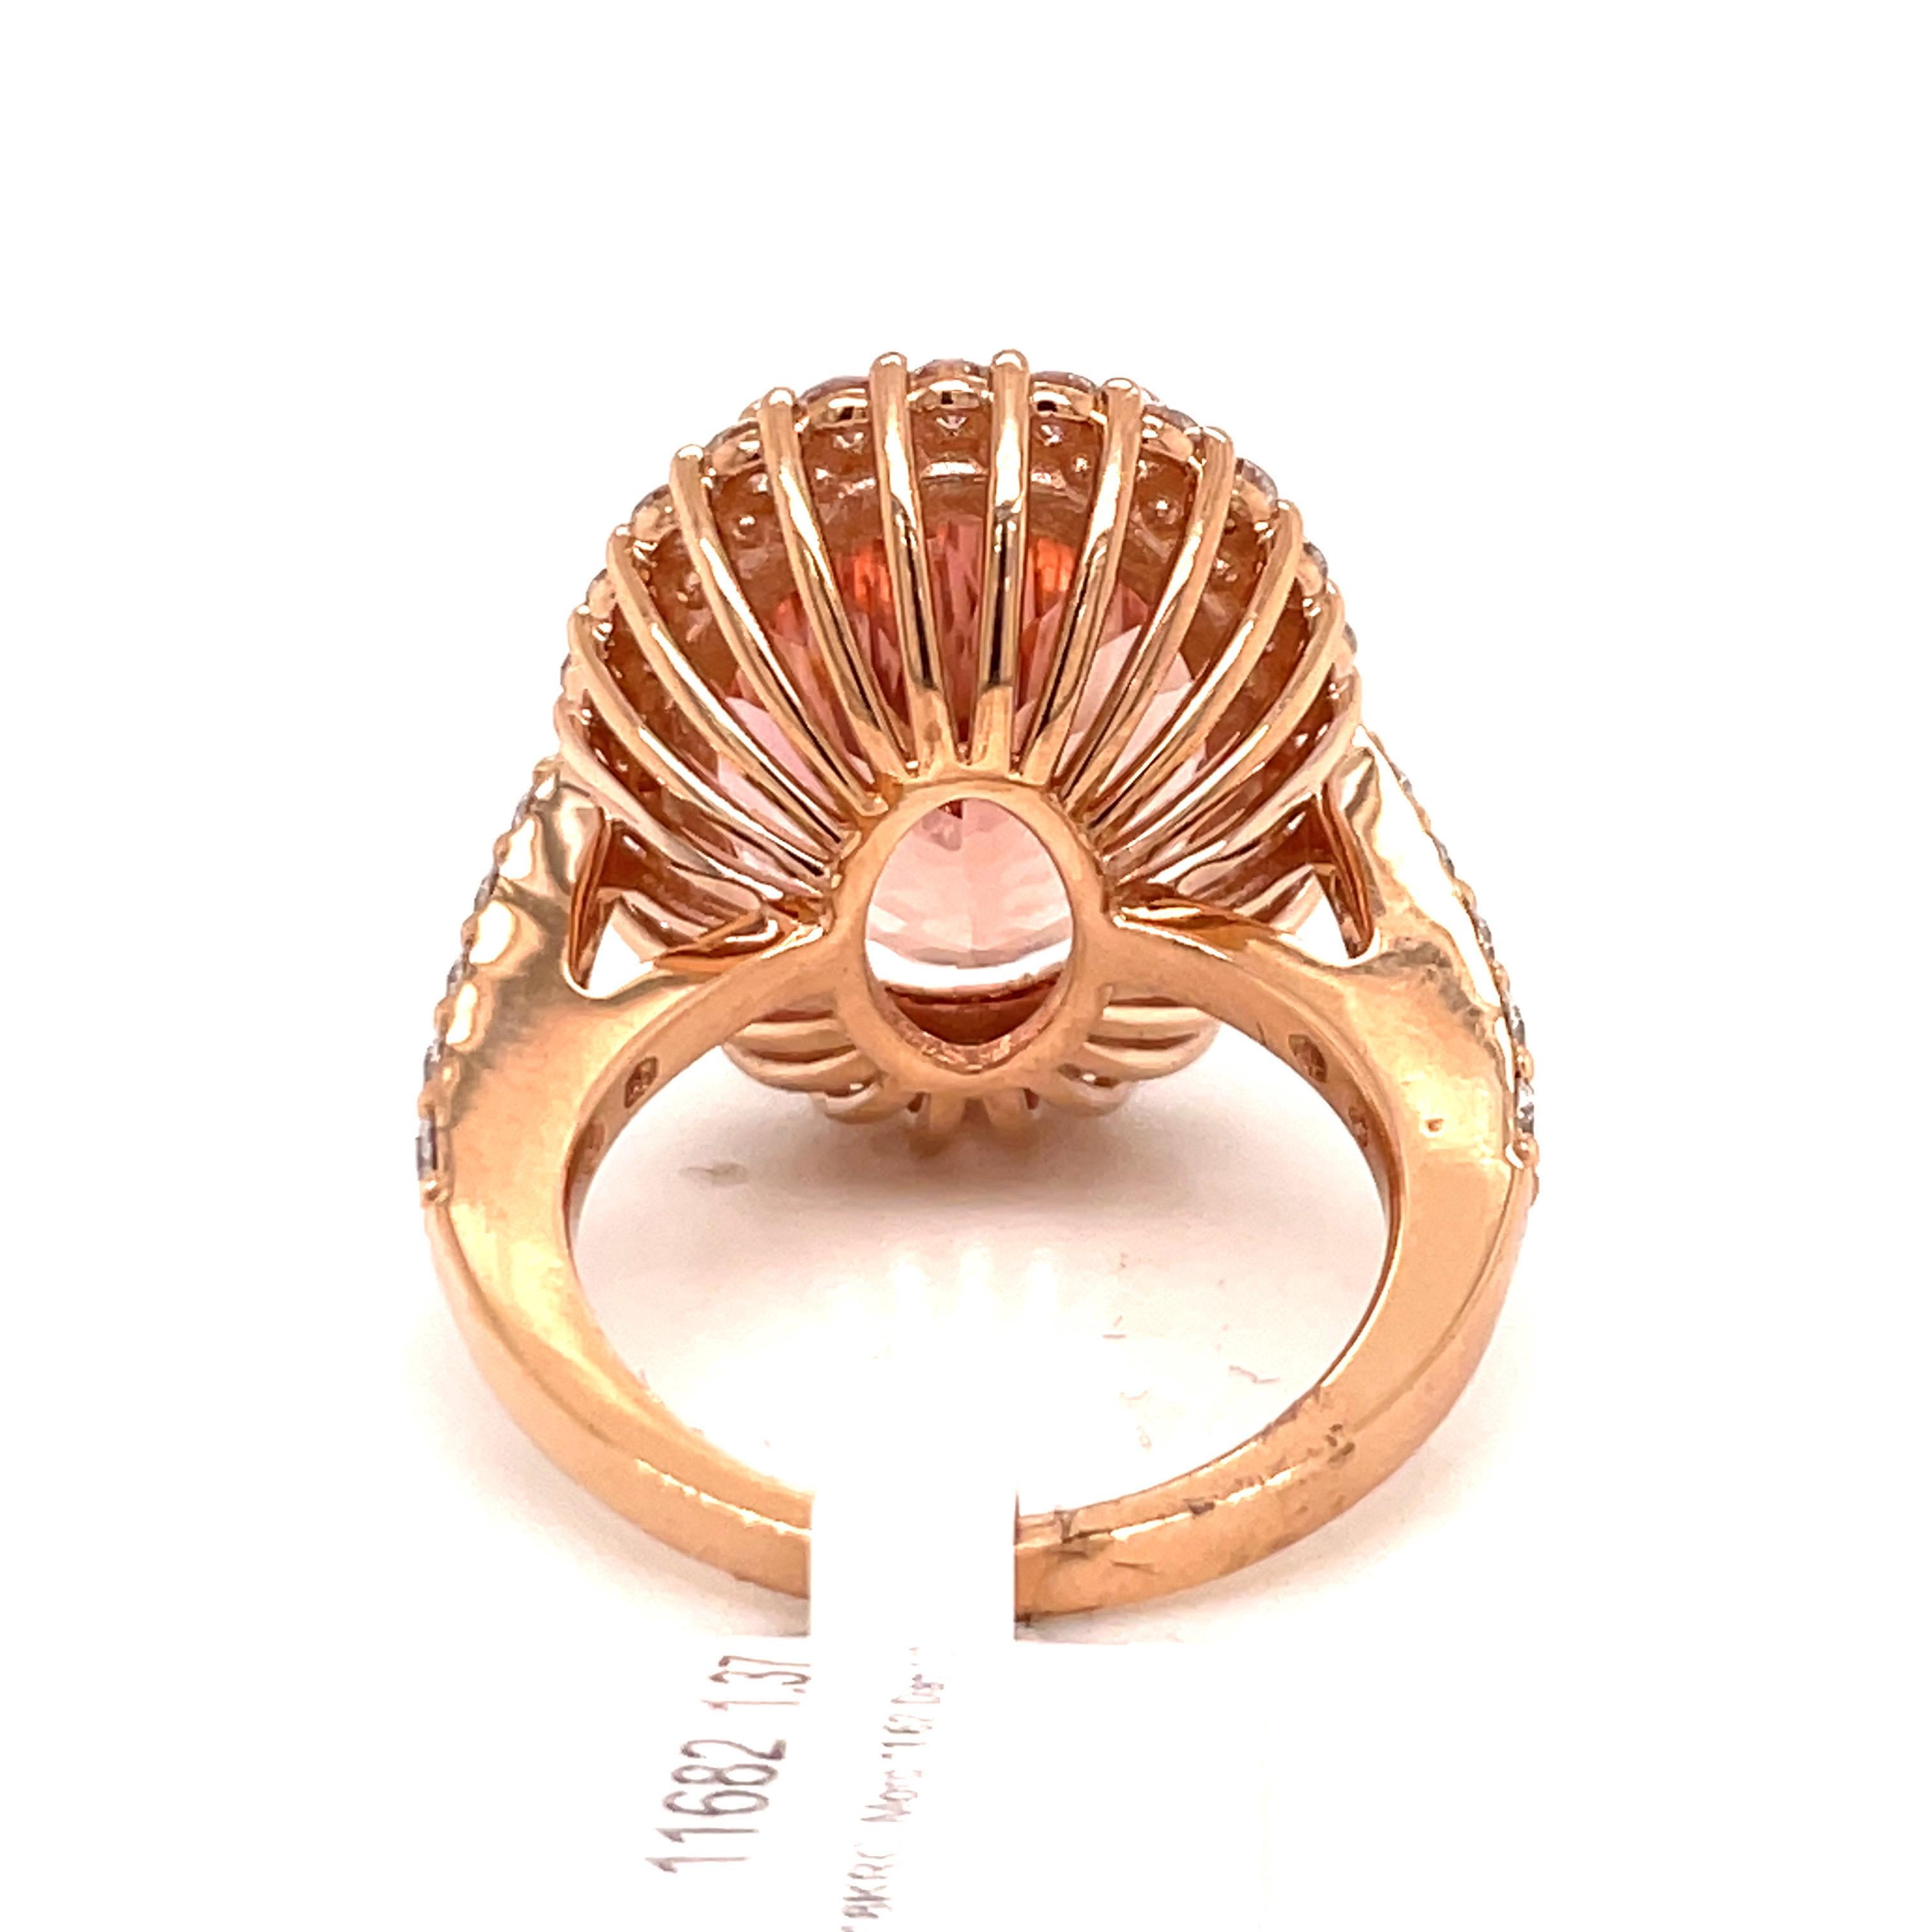 Oval Cut Morganite Diamond Halo Cocktail Ring 12.99 Carats 18 Karat Rose Gold For Sale 4